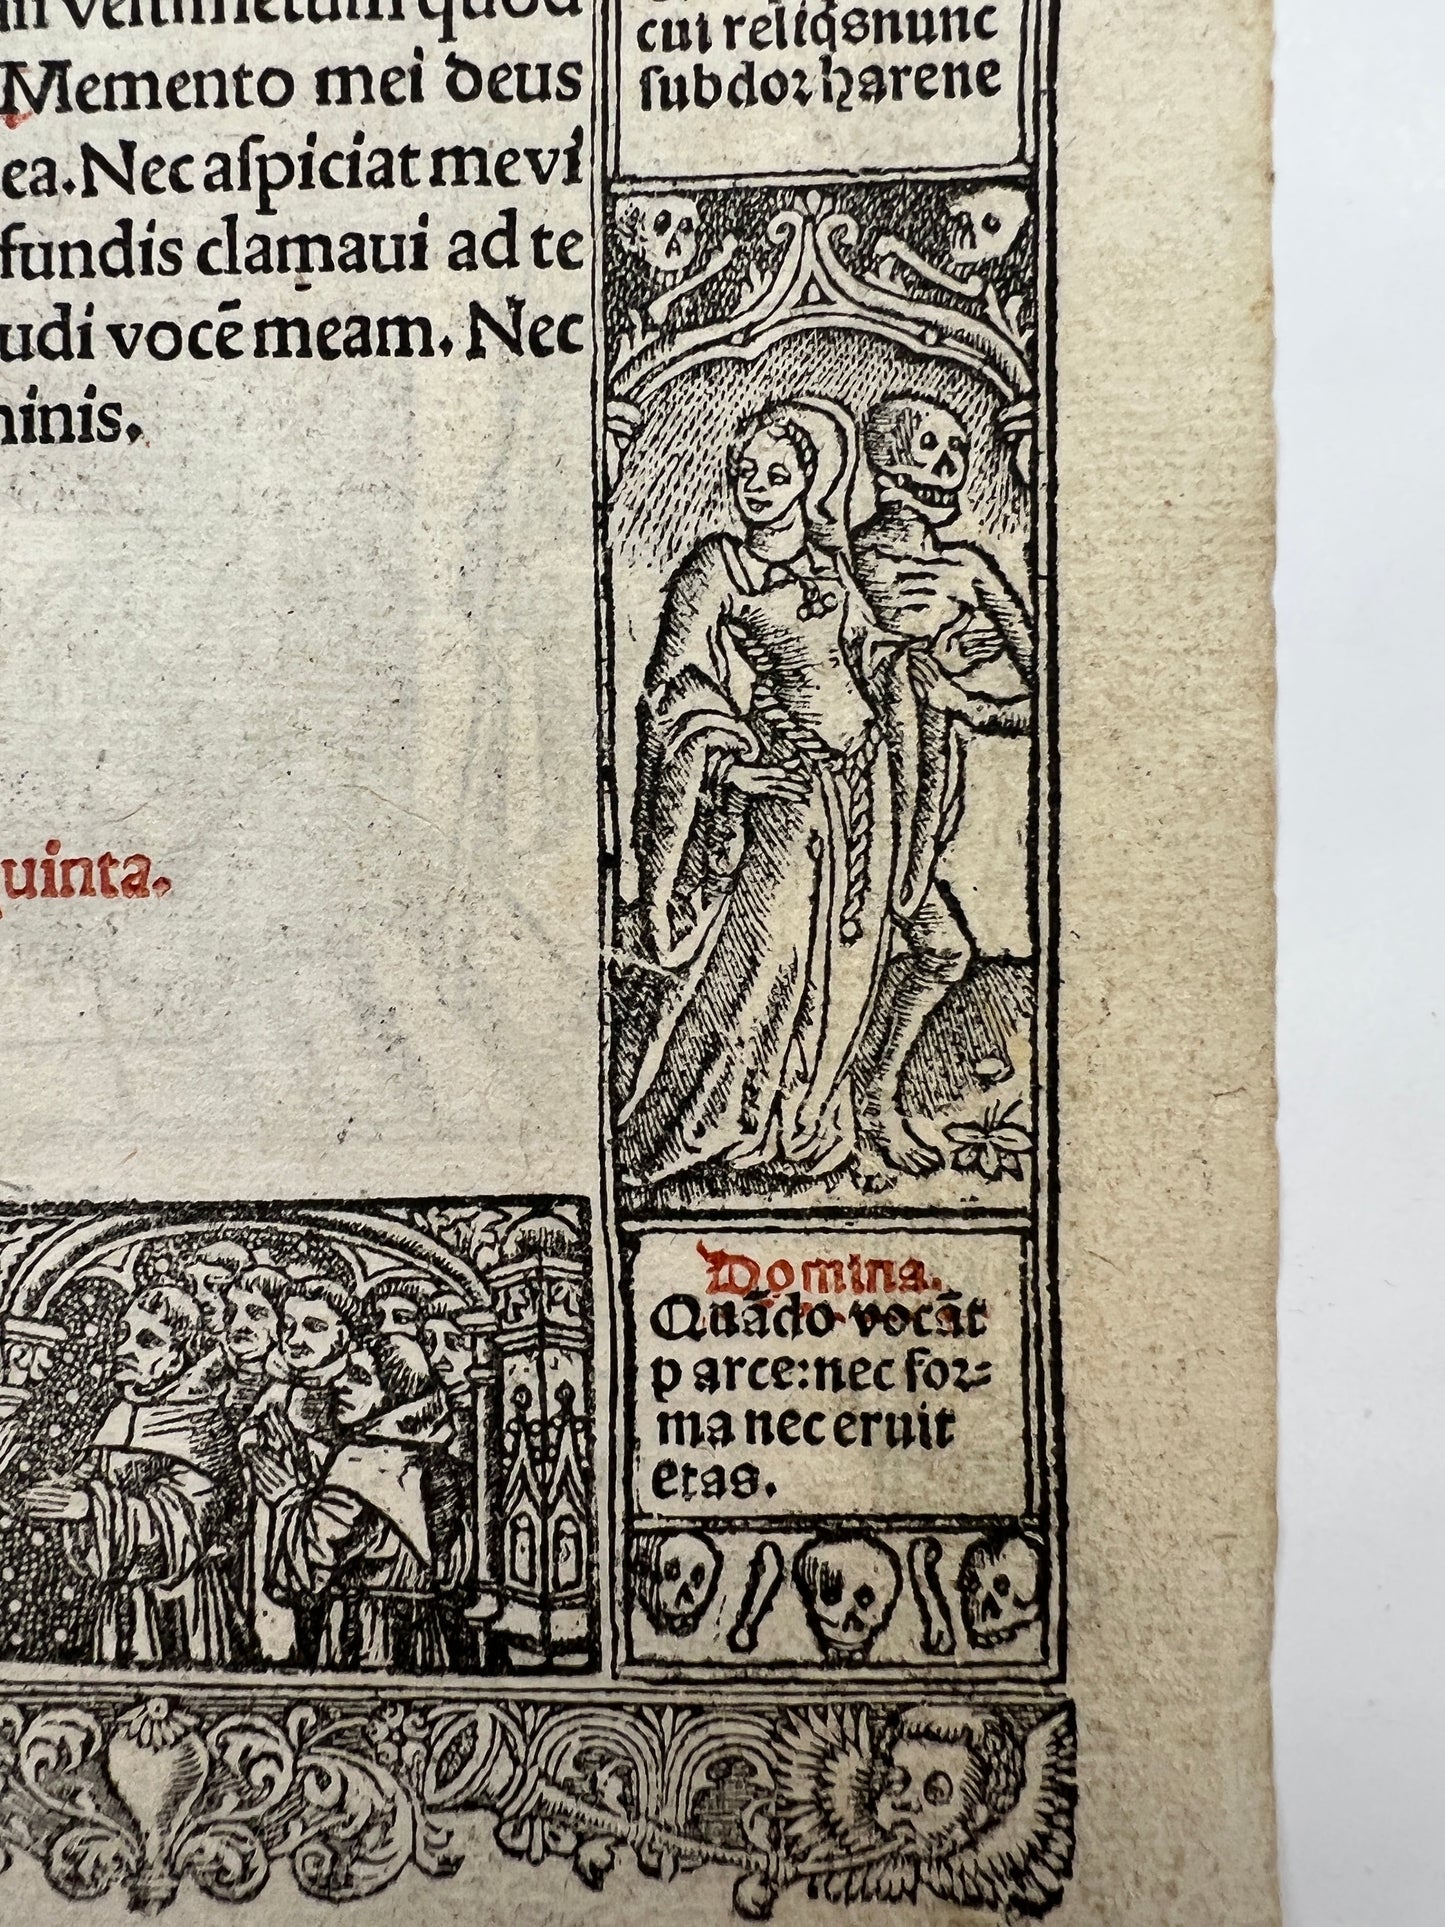 c1500s Leaf from Printed Book of Hours with Metalcuts - Birth & Death